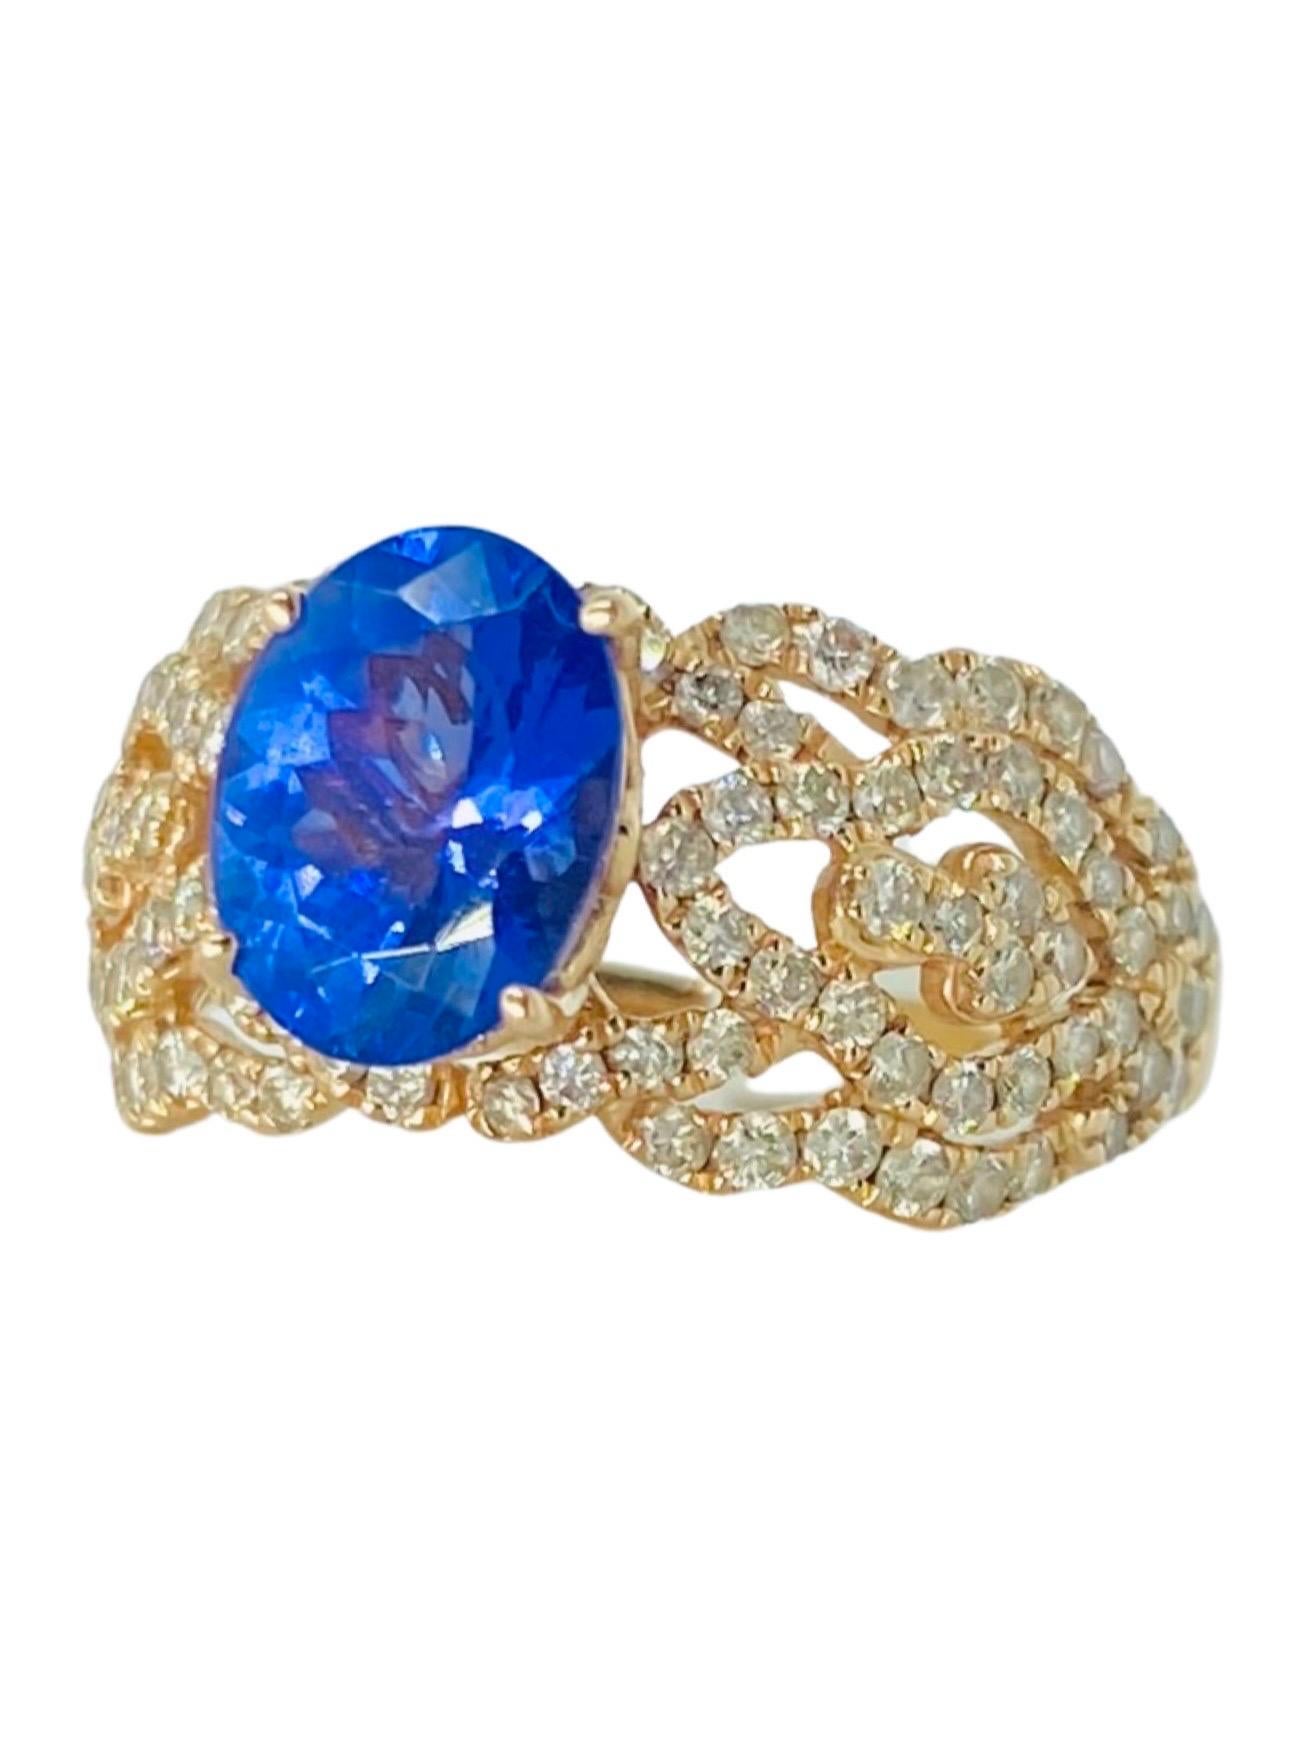 Oval Cut LeVian 2.90 Carat Tanzanite and Diamonds Statement Ring 14k Rose Gold For Sale